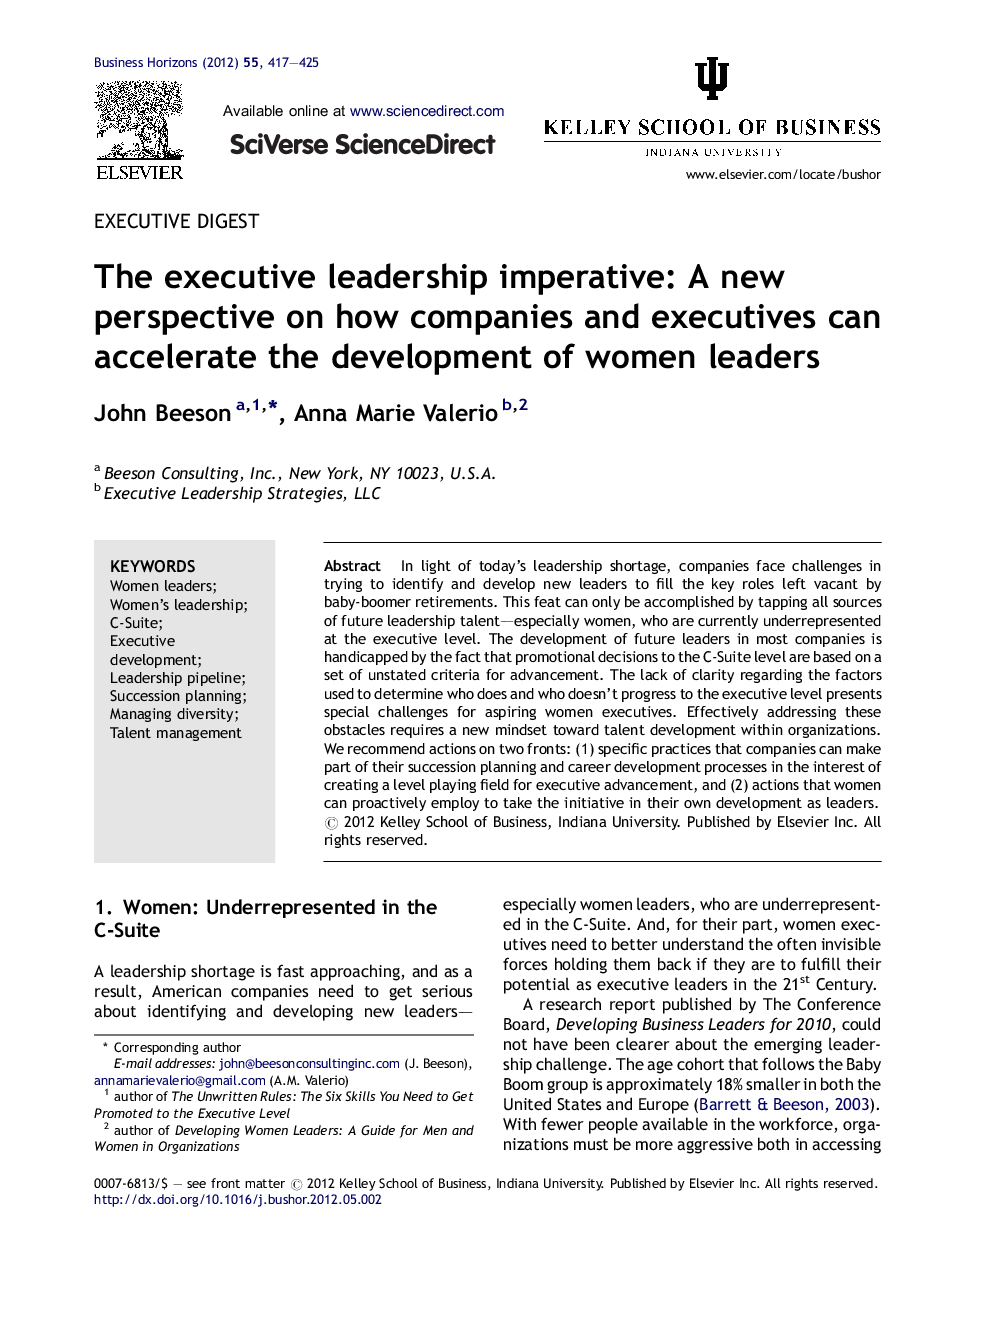 The executive leadership imperative: A new perspective on how companies and executives can accelerate the development of women leaders